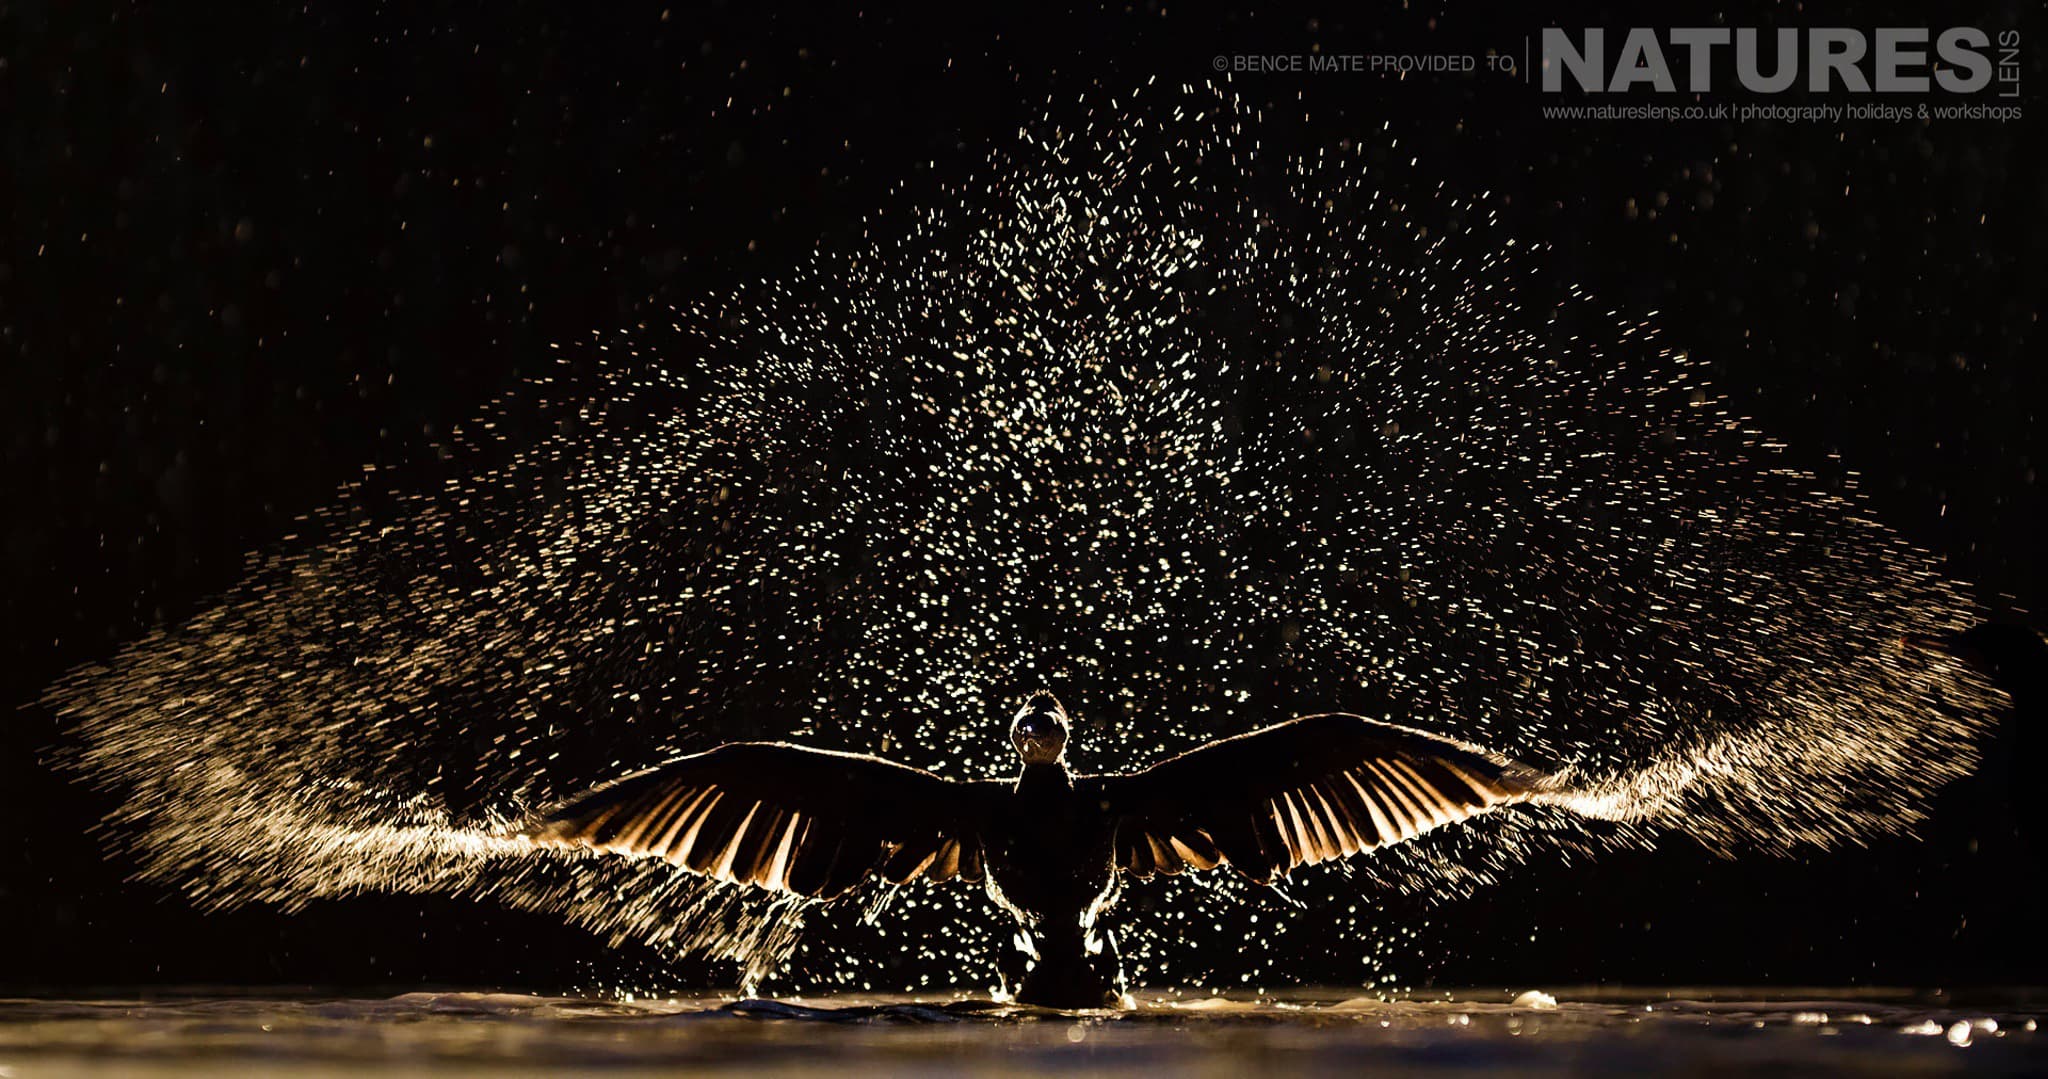 Amazing Backlit opportunities at Bence Máté's Photography Hides during the Hungarian Winter